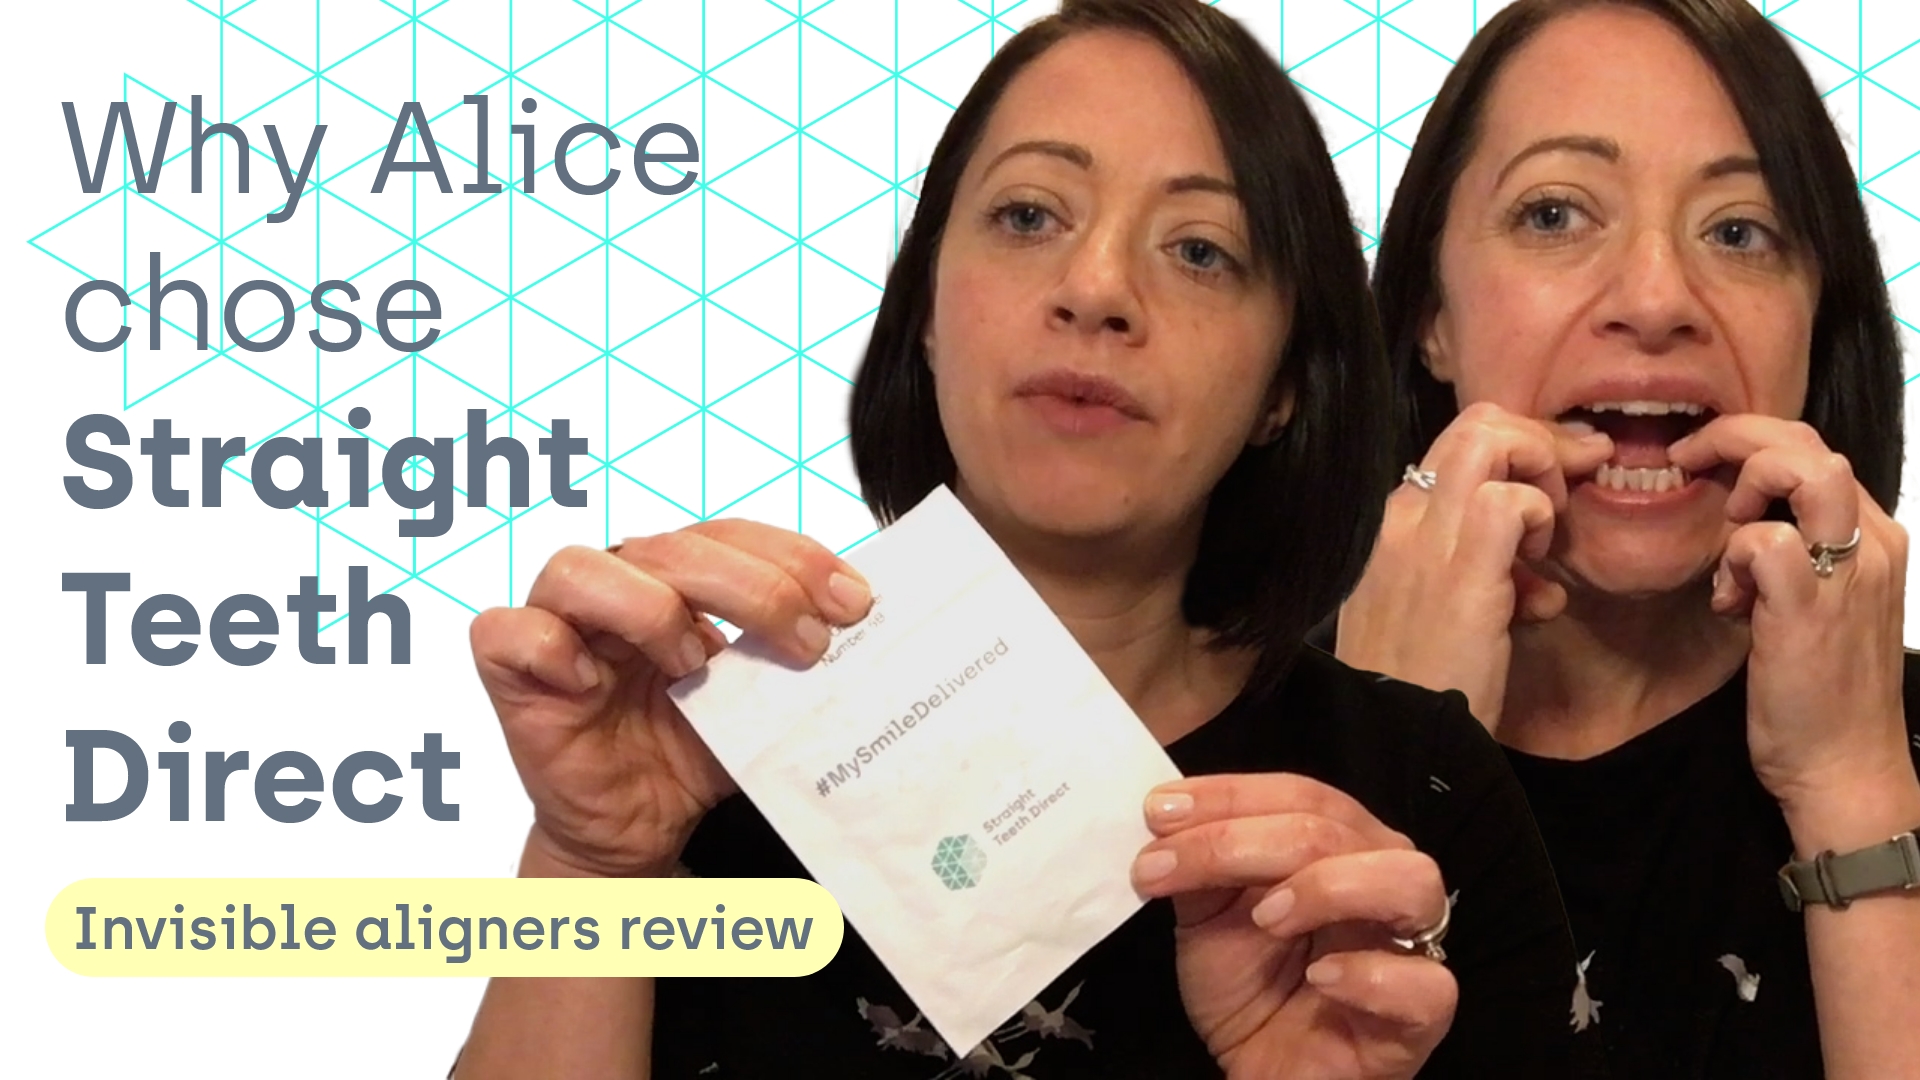 Alice Straight Teeth Direct review